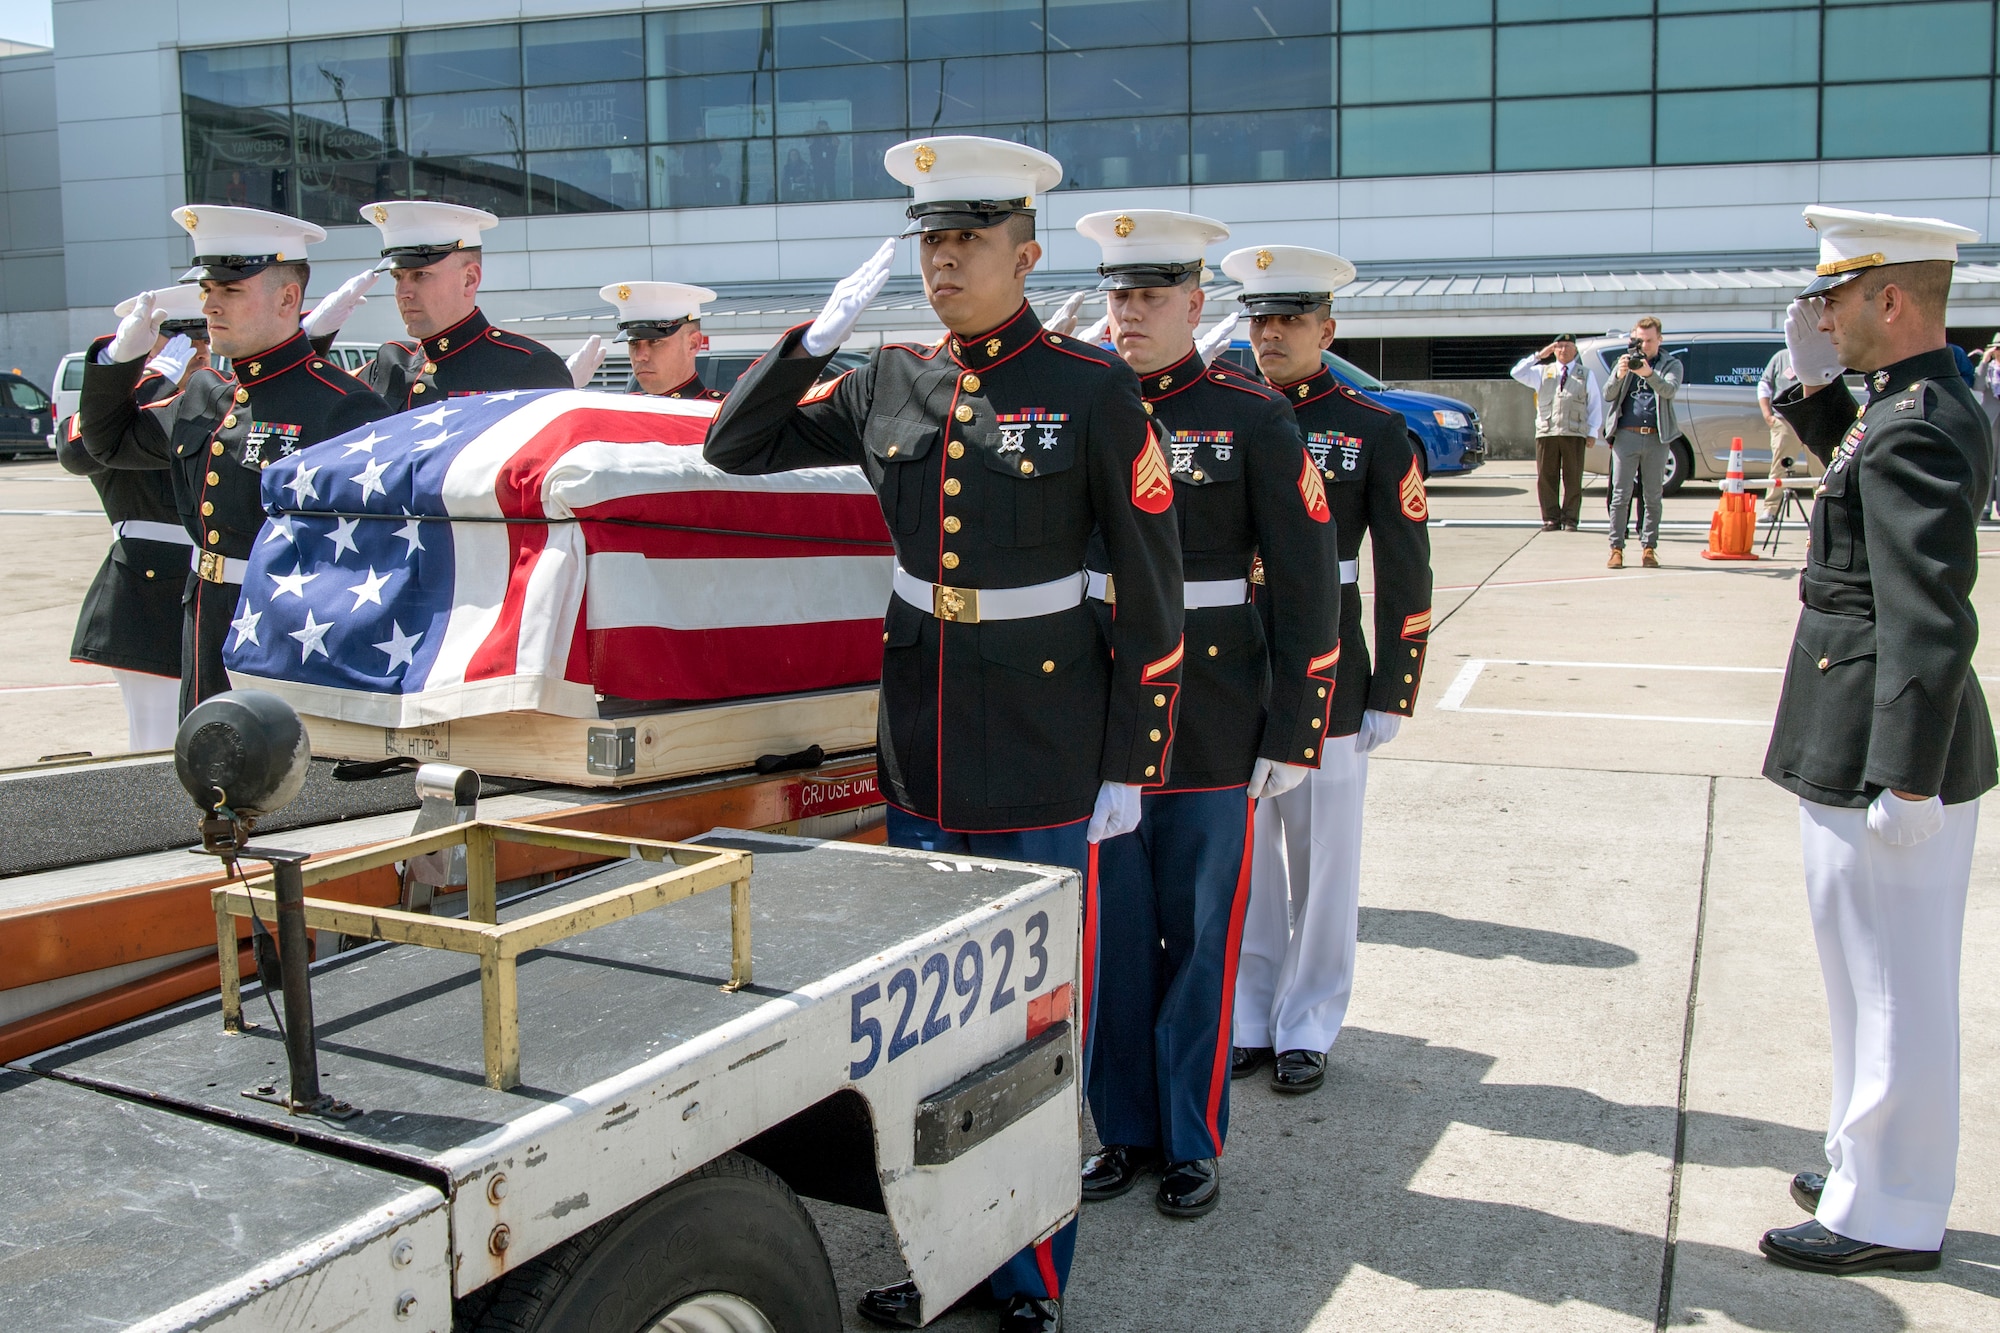 Marines from Detachment 1, Communications Company, Combat Logistics Regiment 45, 4th Marine Logistics Group, render a salute to the casket of Pvt. Fred Freet, 18, of Marion, Indiana, during a dignified transfer at the Indianapolis International Airport April 16, 2019. Marines were humbled by the experience of returning one of their own, a World War II veteran who until recently had been declared as unrecoverable killed in action by the. (U.S. Air Force photo/Master Sgt. Ben Mota)